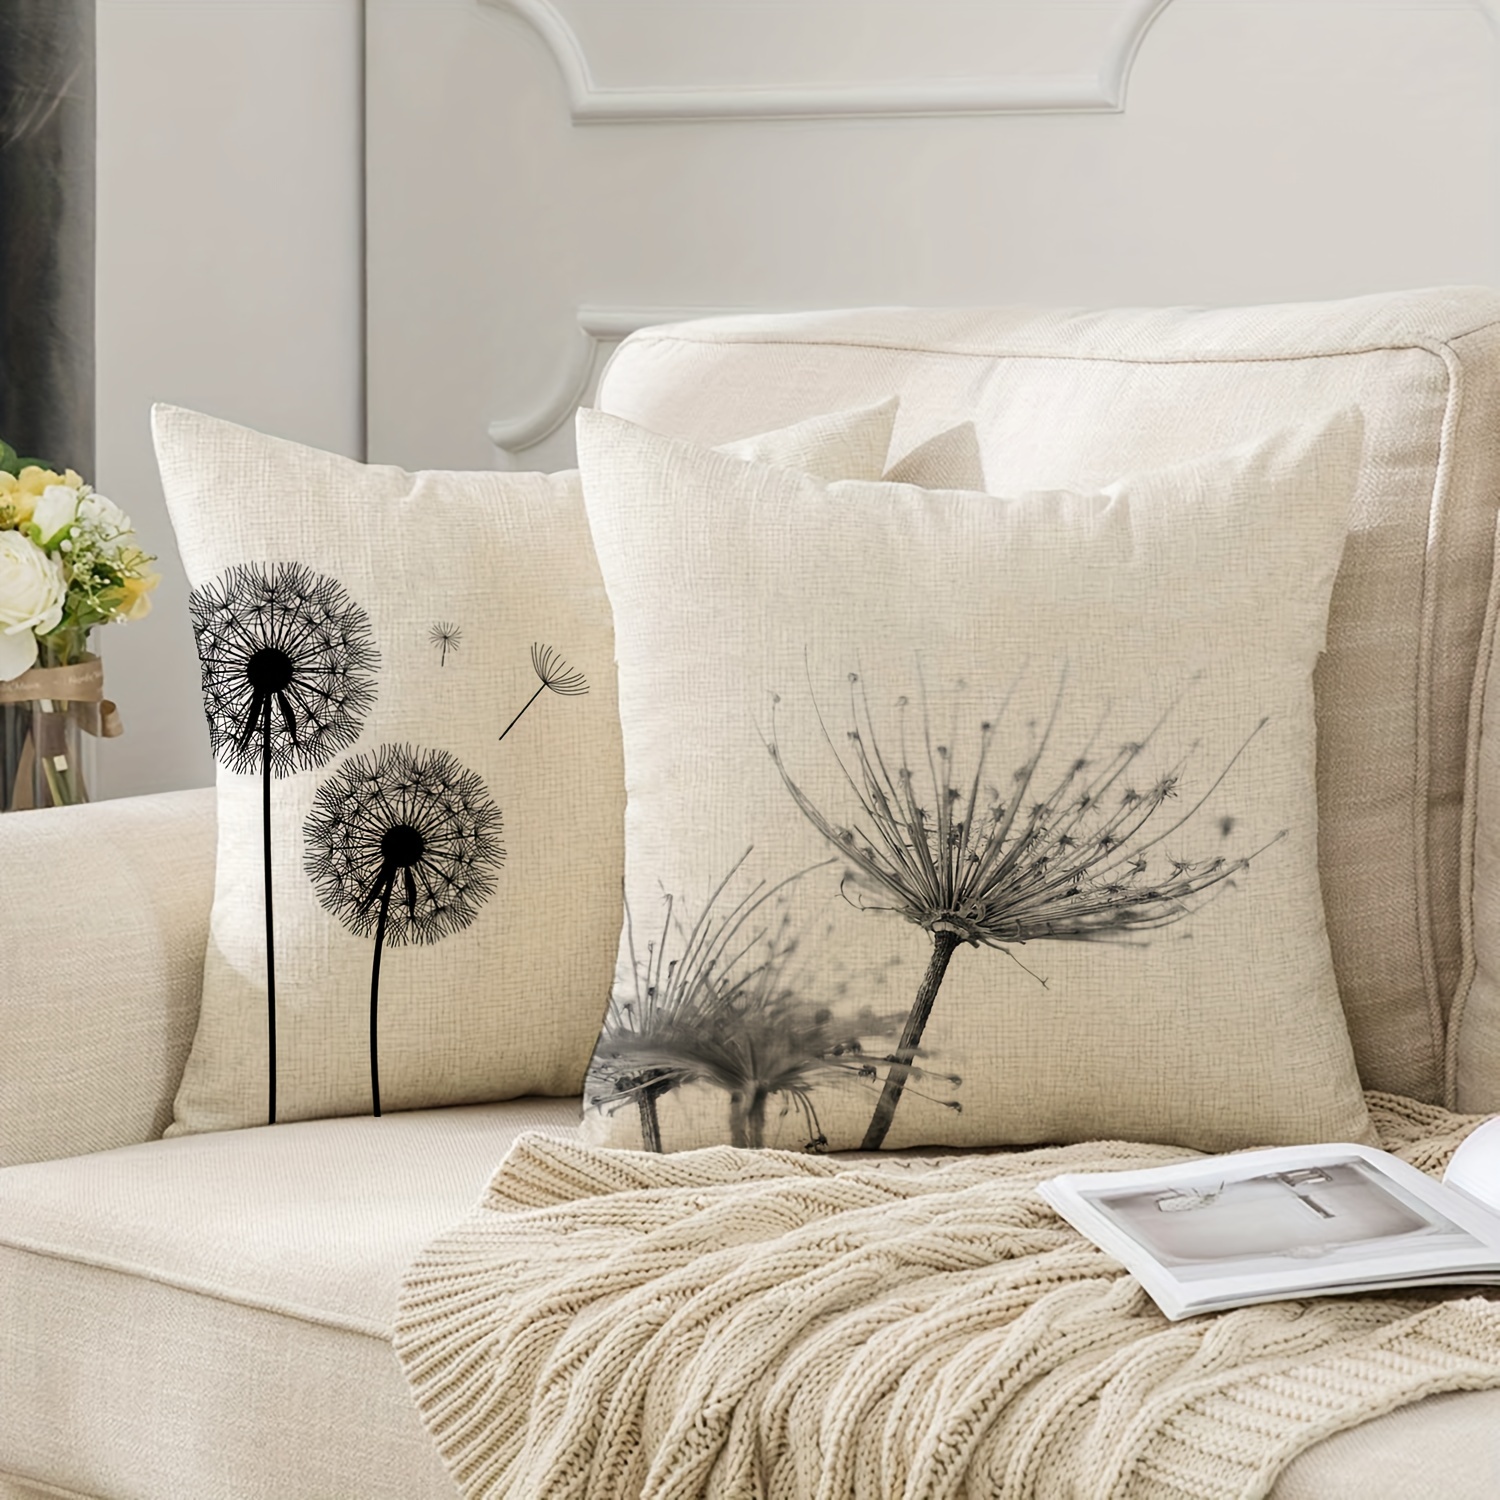 

1pc, Taraxacum Flower Decorative Throw Pillow Cover, Linen Square Decorative Throw Pillow Cover, Outdoor Pillow Cover, Bedroom Sofa Bed Car Home Decoration Cushion Cover (without Pillow Core)